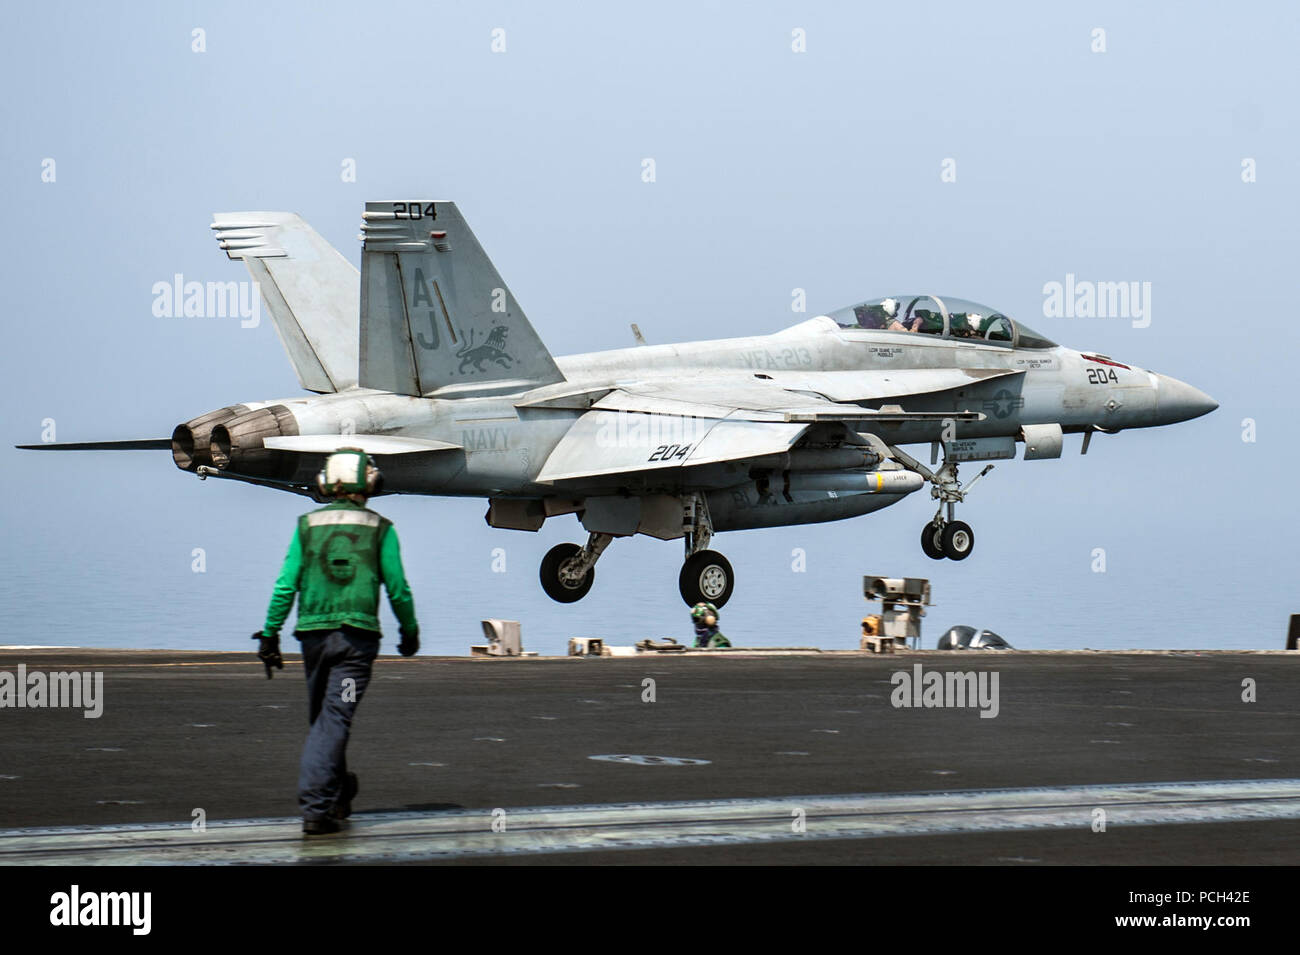 A U.S. Navy F/A-18F Super Hornet aircraft assigned to Strike Fighter Squadron (VFA) 213 lands aboard the aircraft carrier USS George H.W. Bush (CVN 77) Sept. 1, 2014, in the Persian Gulf. The George H.W. Bush was supporting maritime security operations and theater security cooperation efforts in the U.S. 5th Fleet area of responsibility. Stock Photo